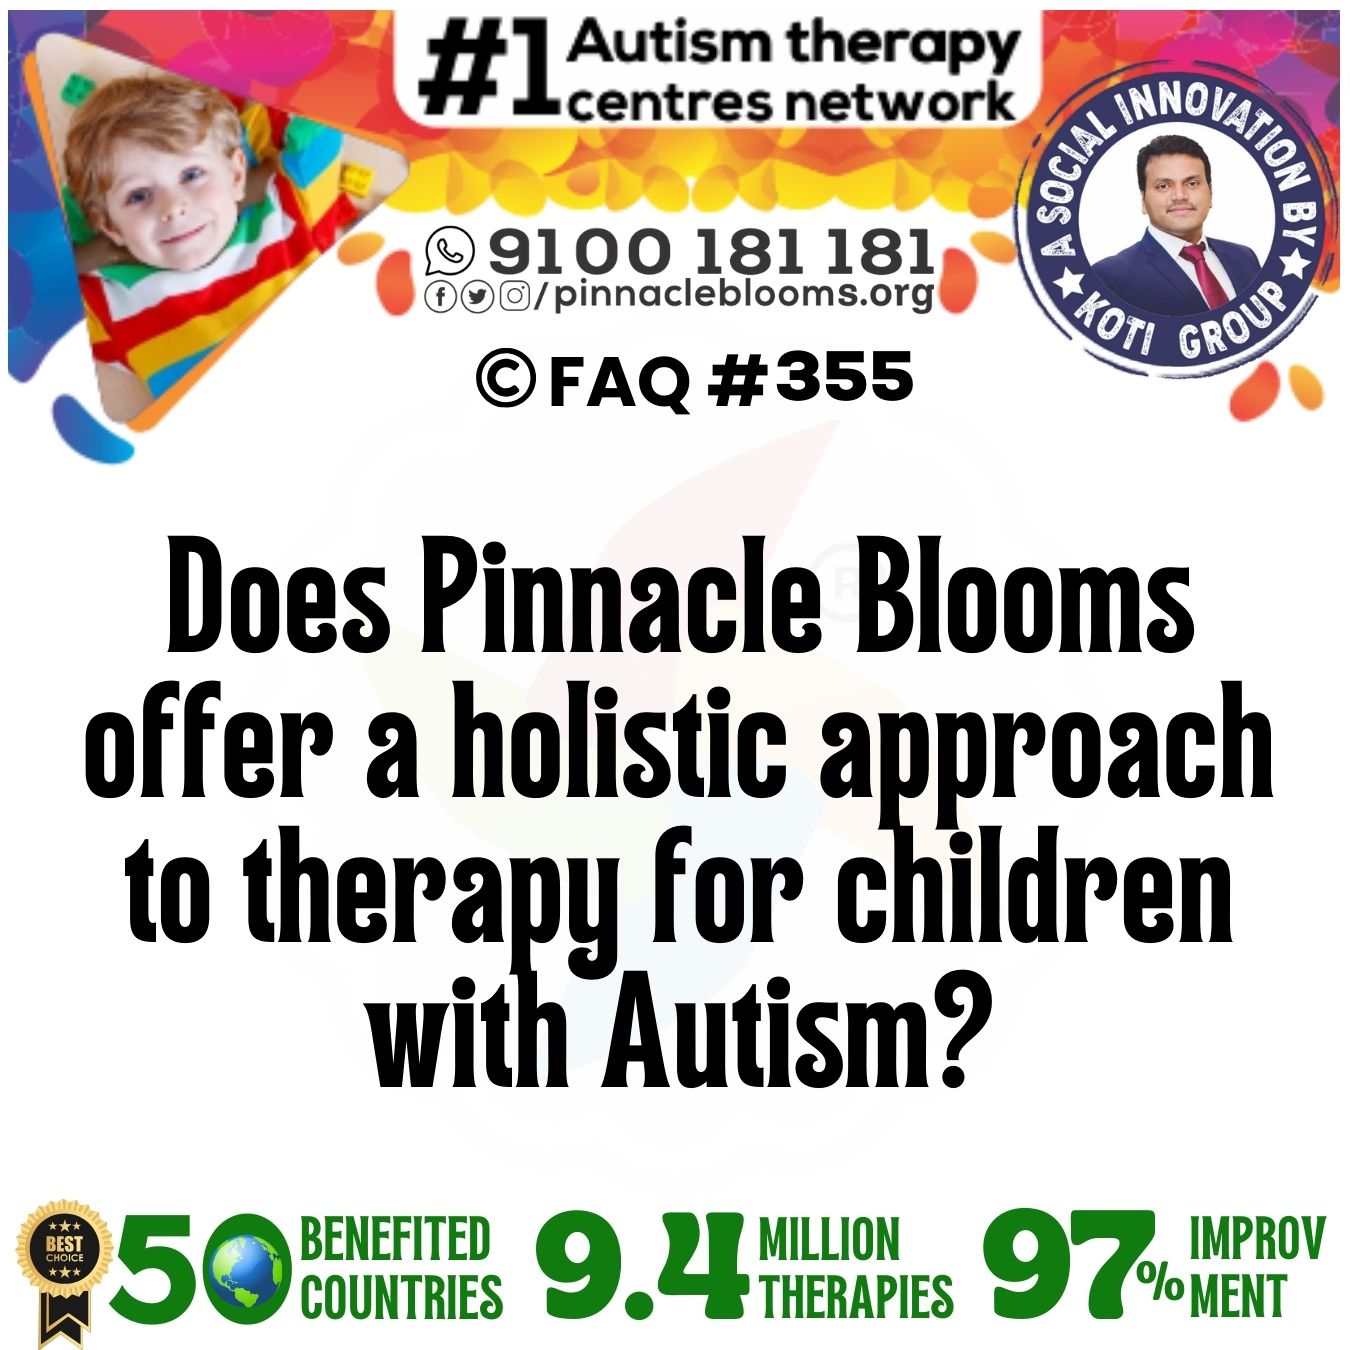 Does Pinnacle Blooms offer a holistic approach to therapy for children with Autism?